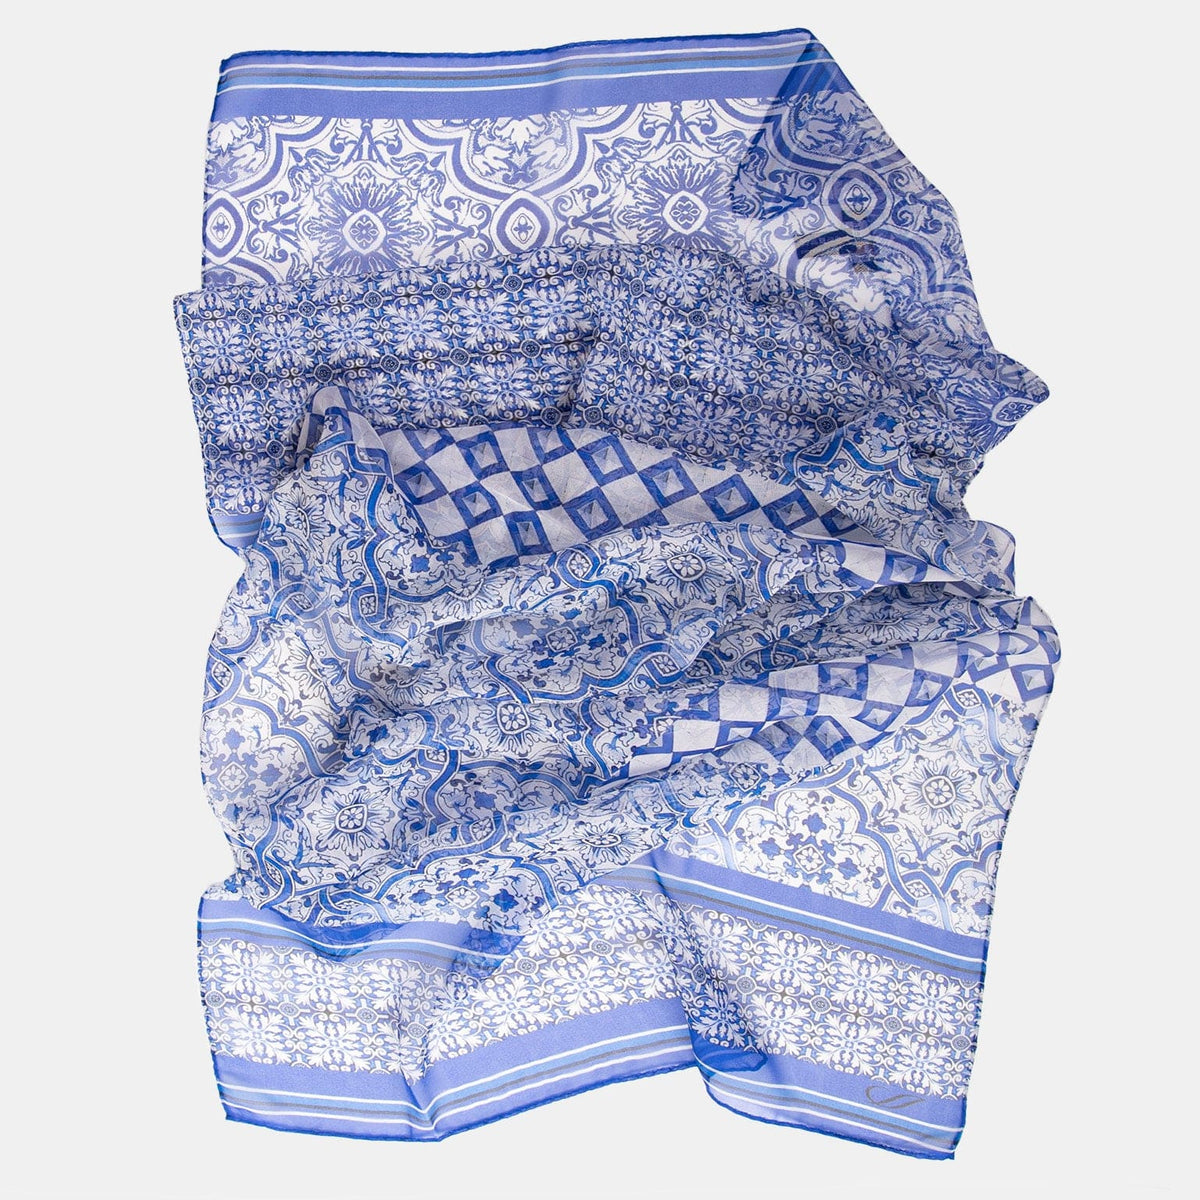 Blue and White Tile Motif Silk Scarf